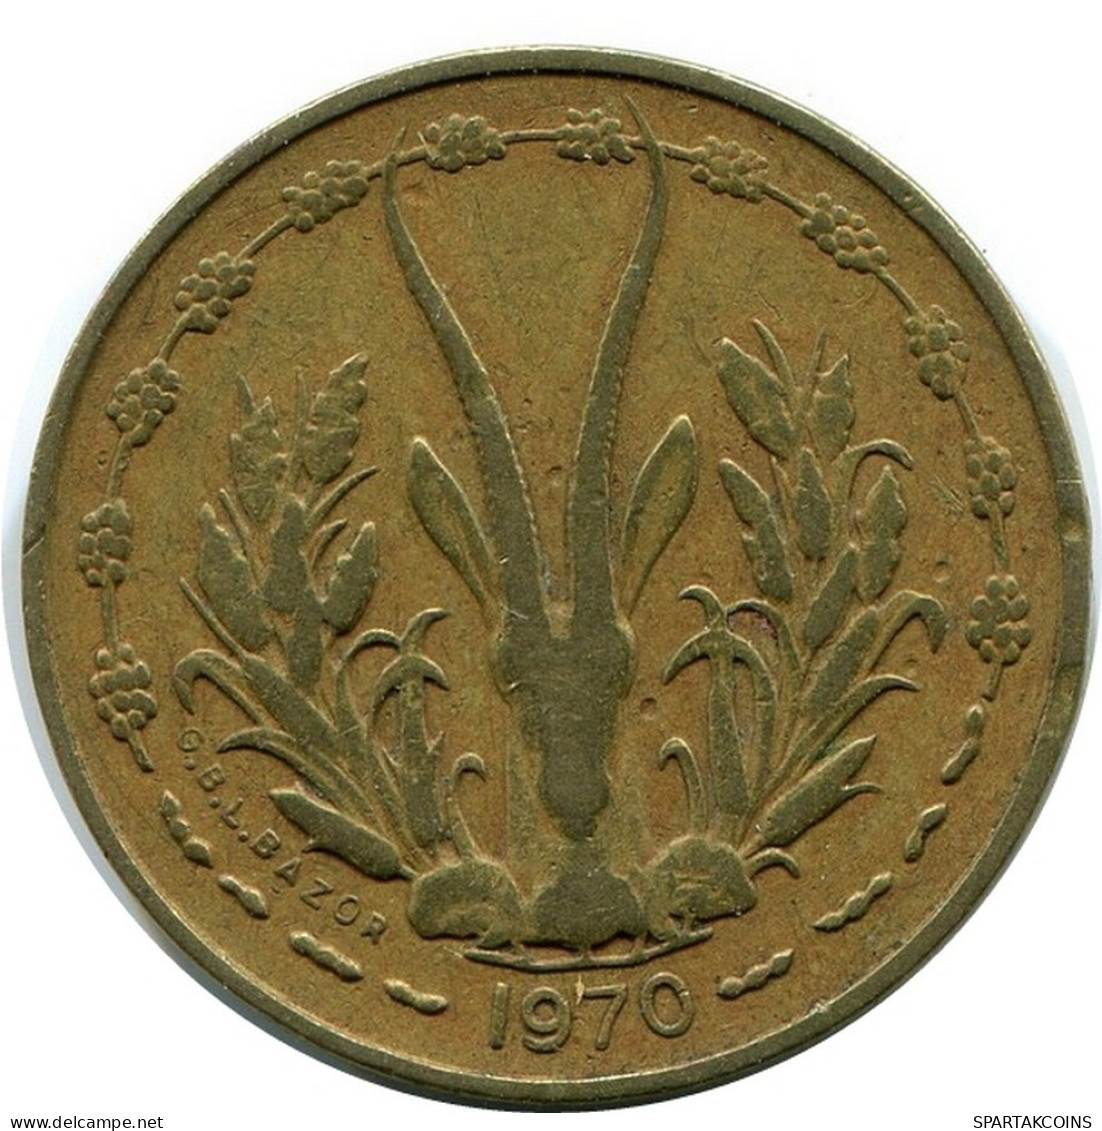 5 FRANCS 1970 WESTERN AFRICAN STATES Münze #AR264.D.A - Other - Africa